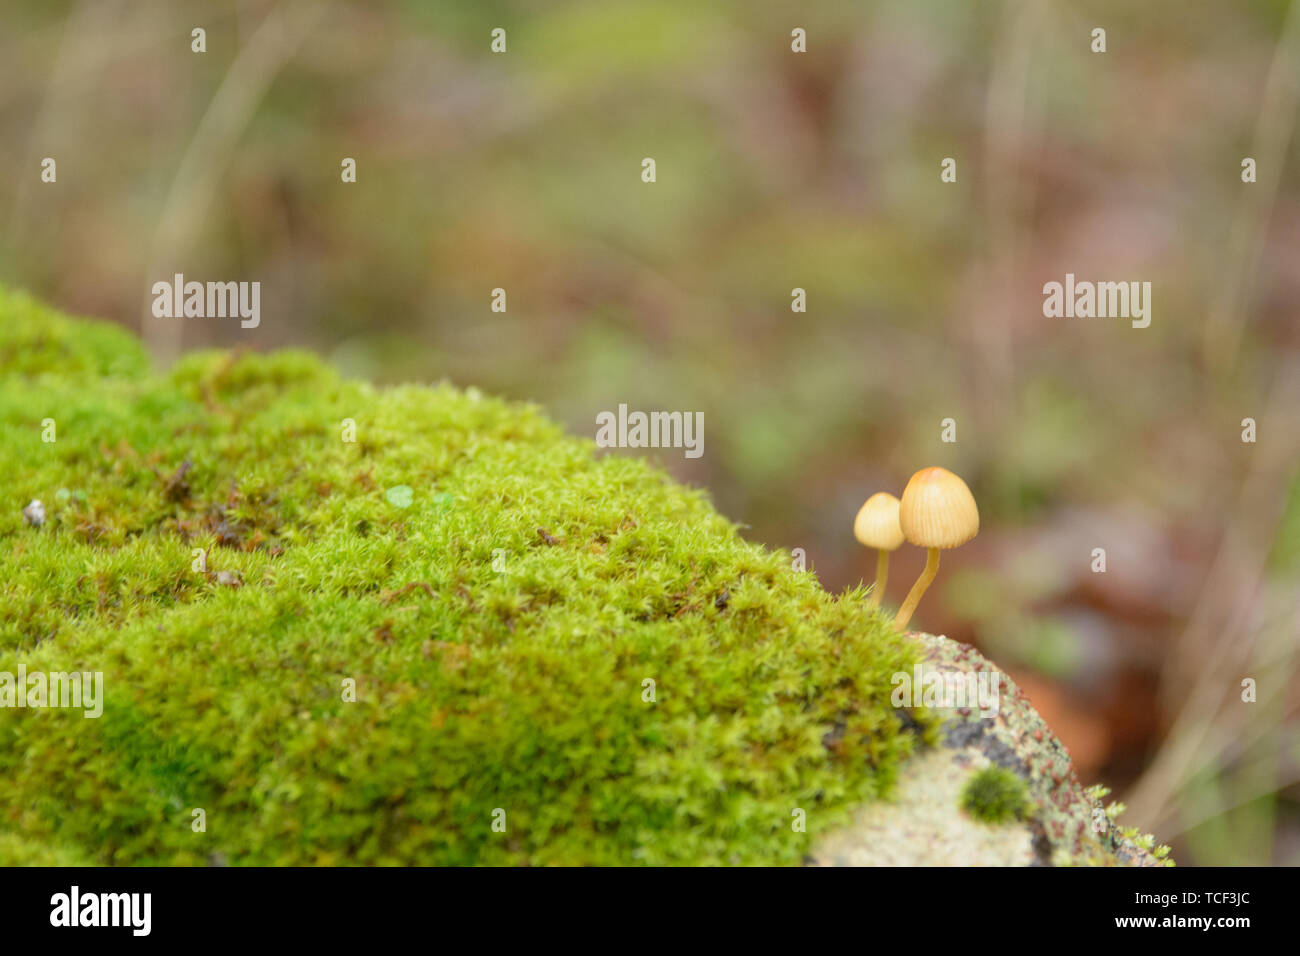 Close up view of green moss growing on rock with small wild inedible mushrooms on blurred background Stock Photo